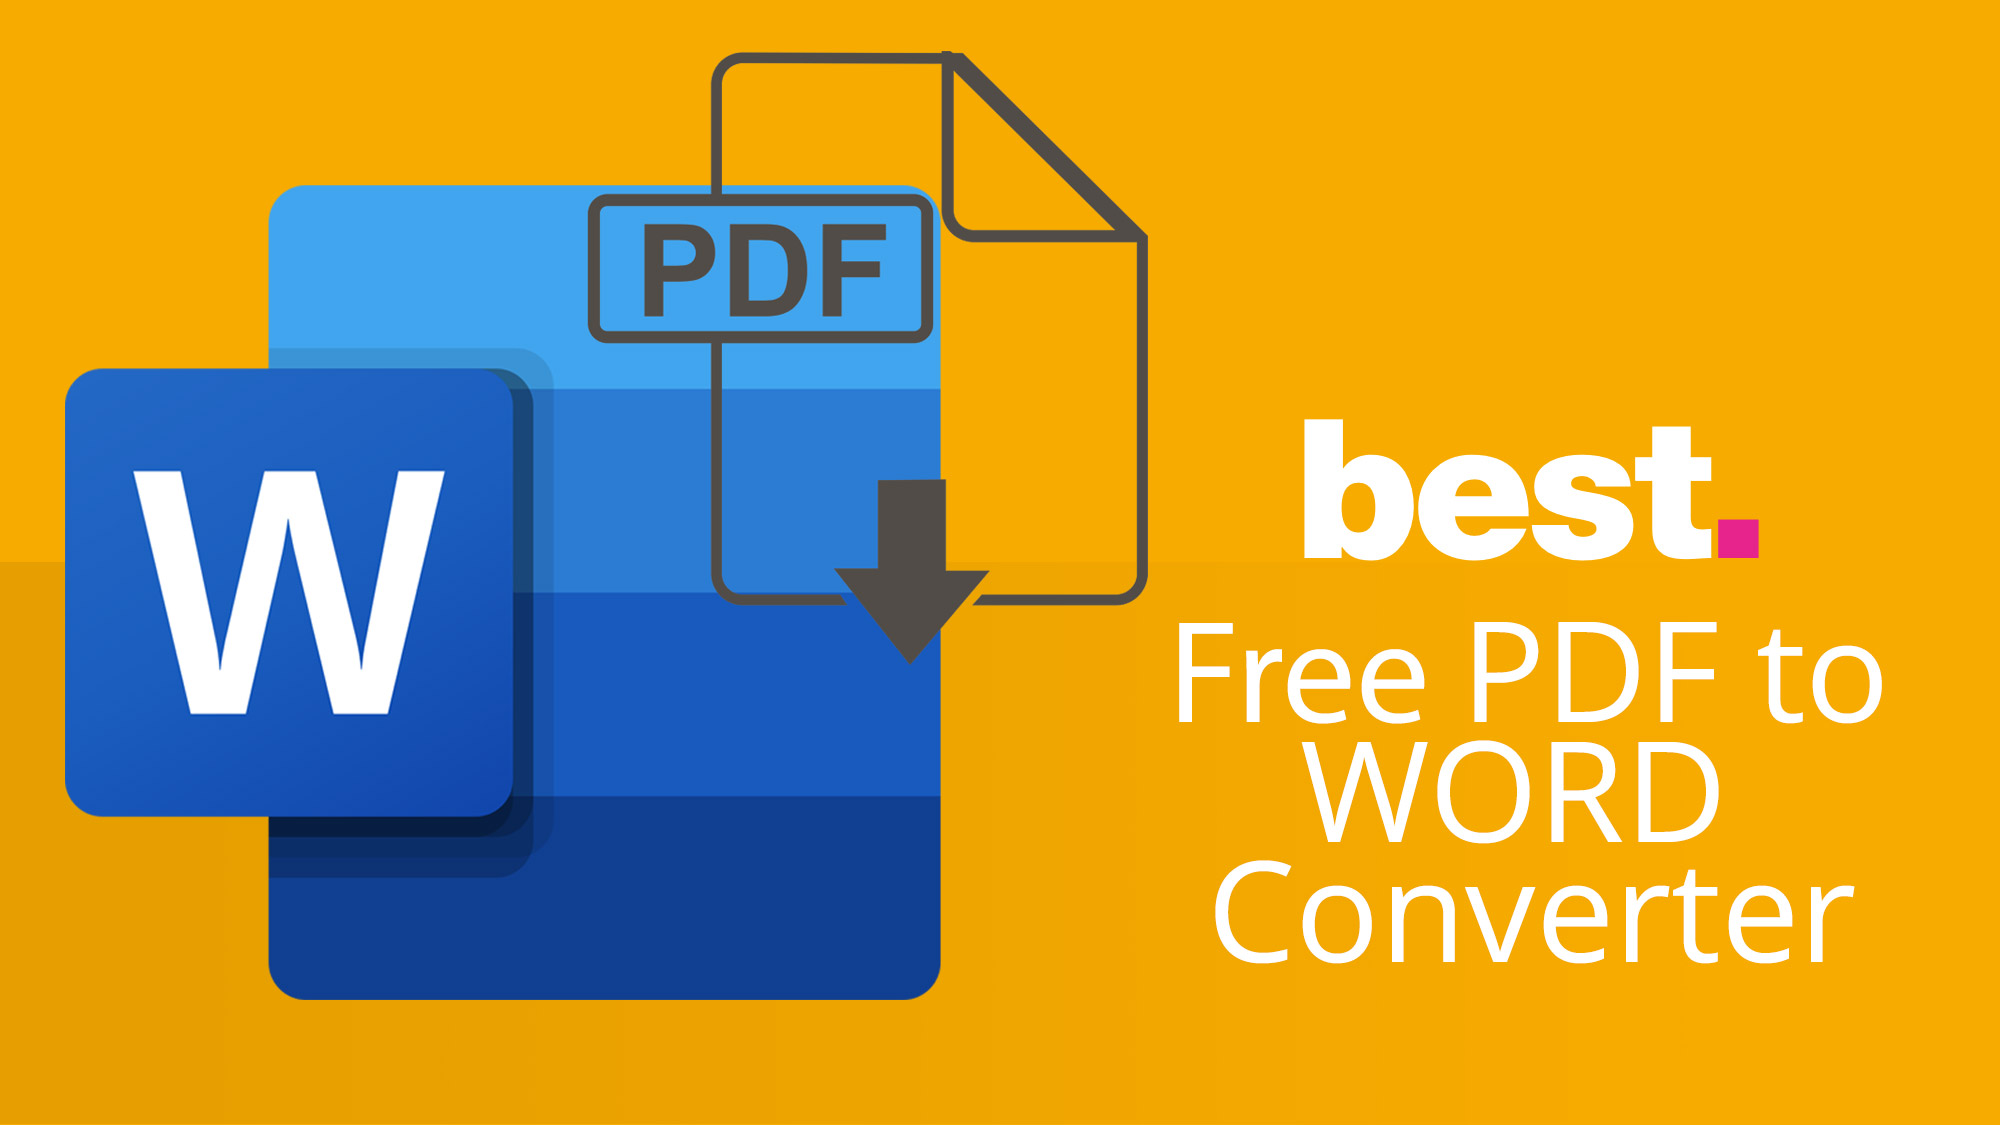 how do i convert a pdf file to a word document that i can edit